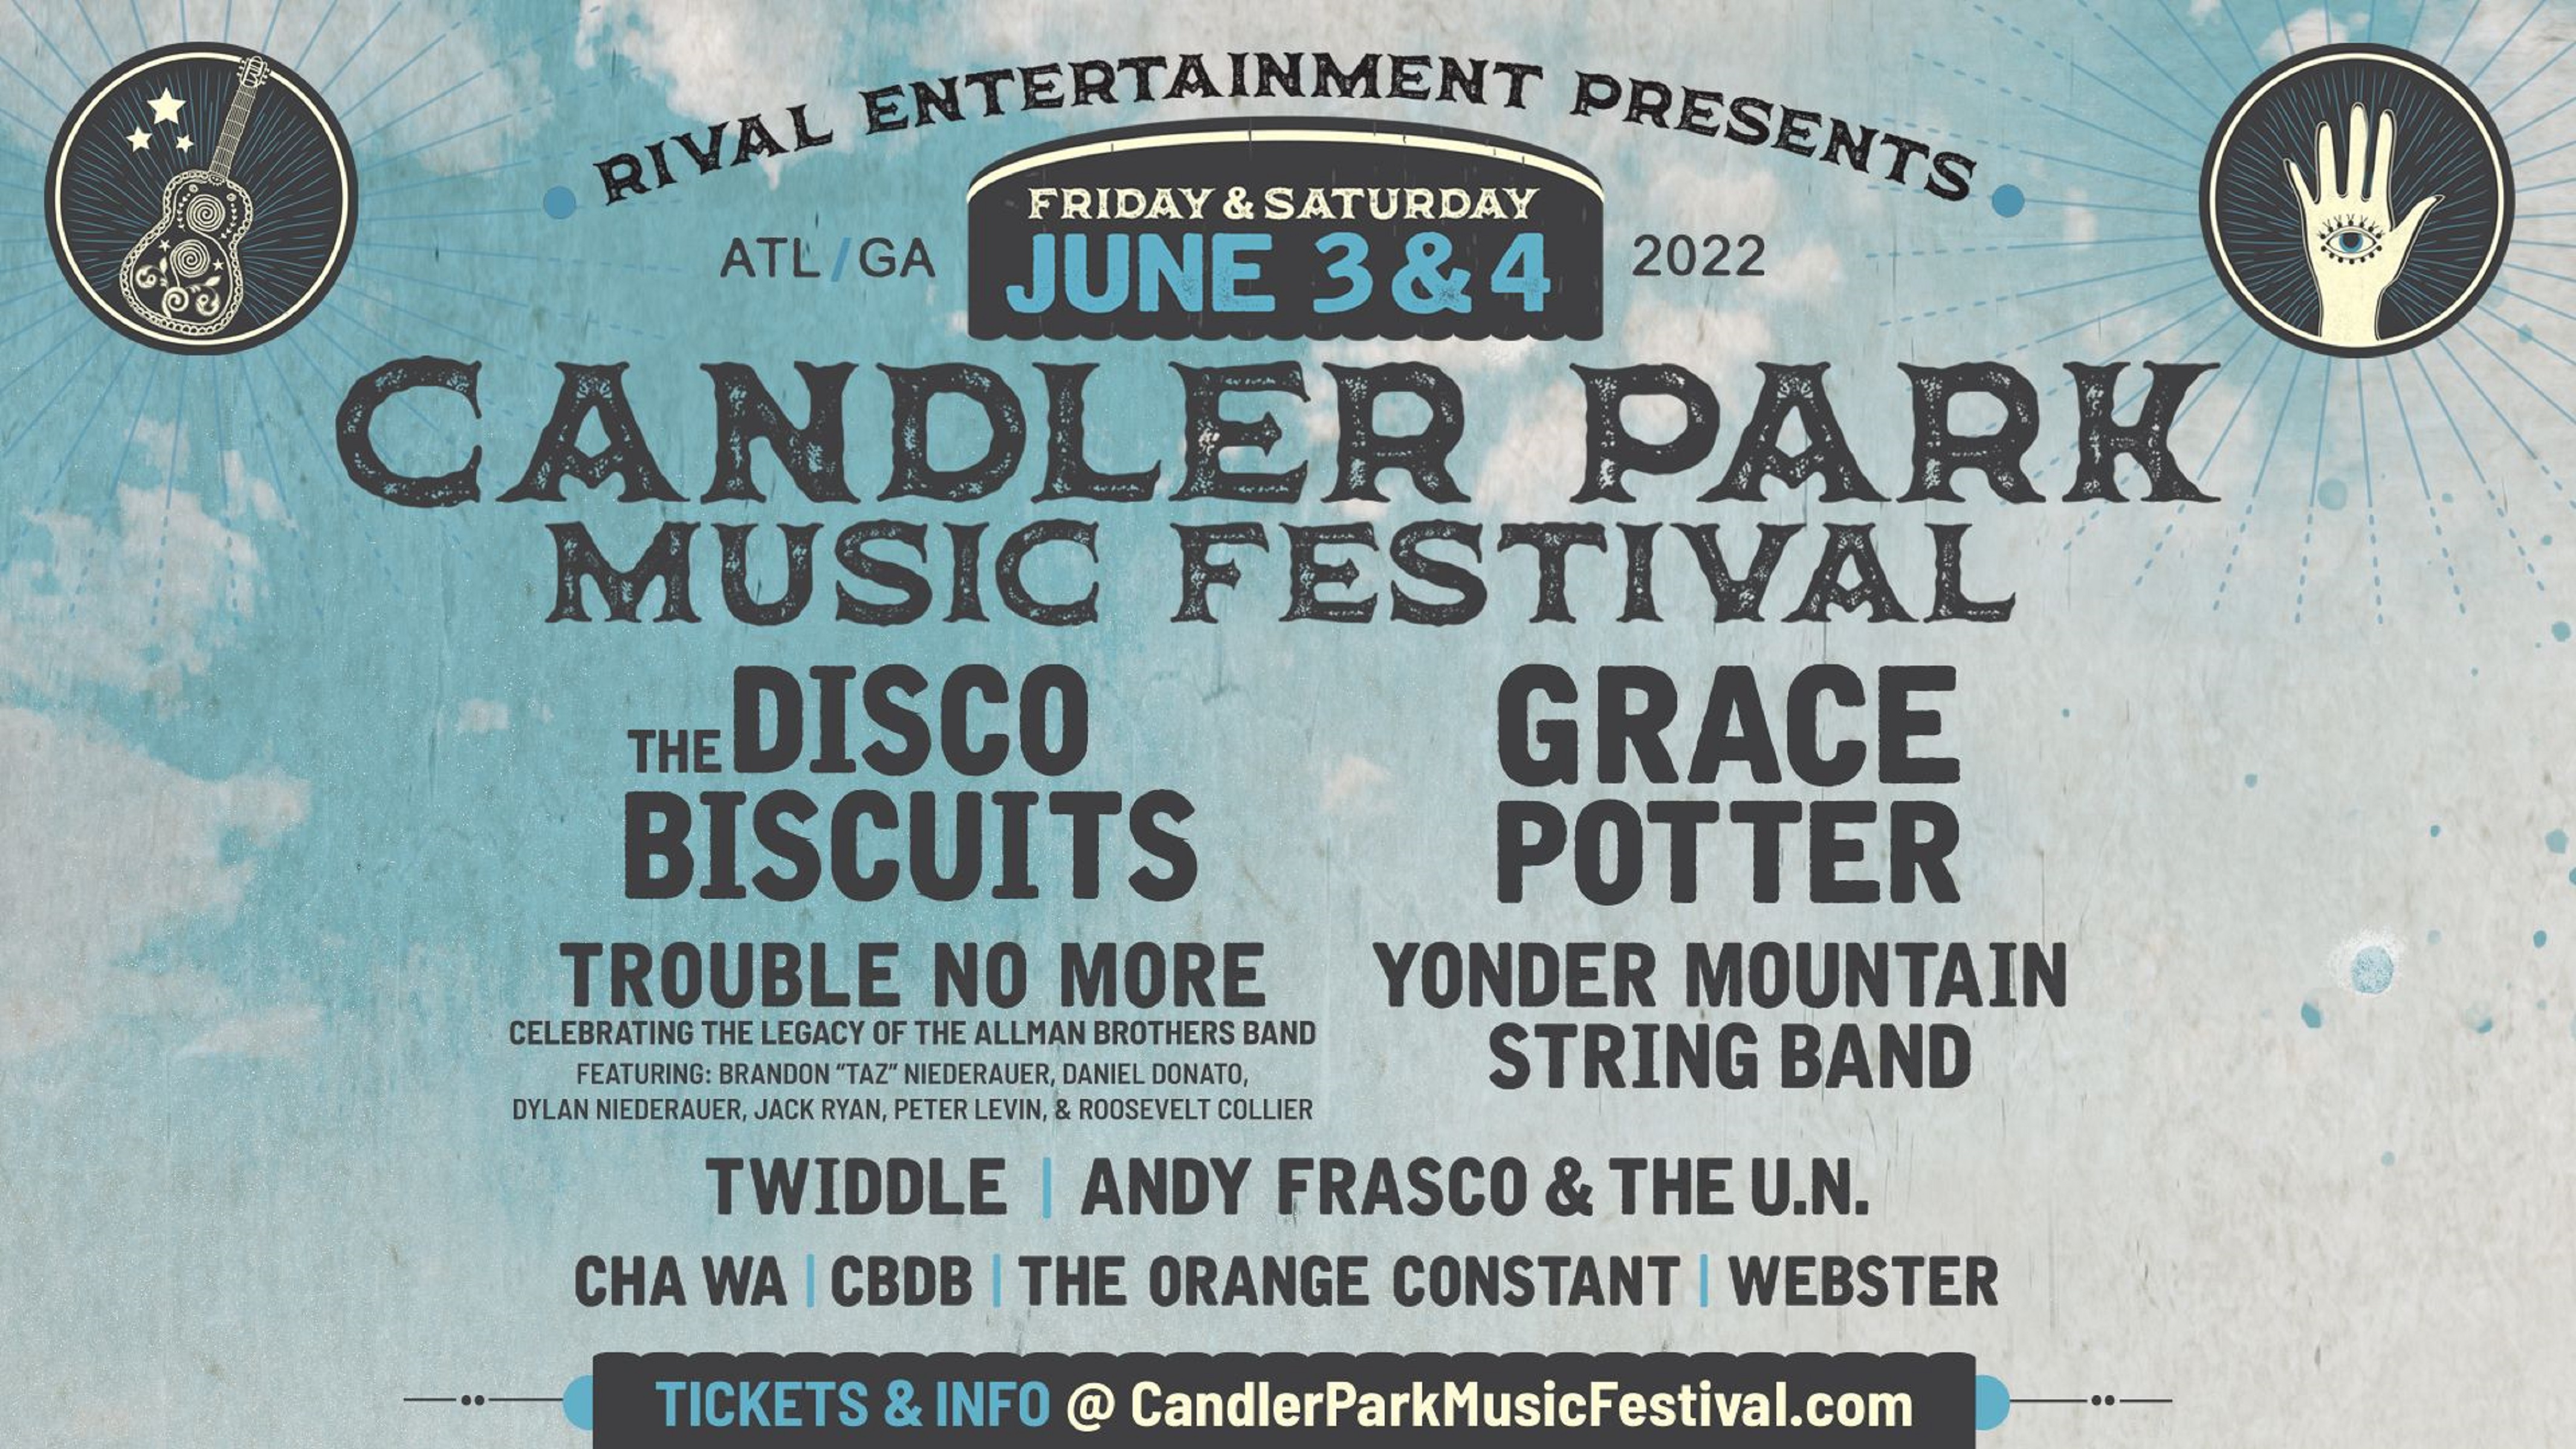 CANDLER PARK MUSIC FESTIVAL IS COMING SOON, JUNE 03 & 04, 2022